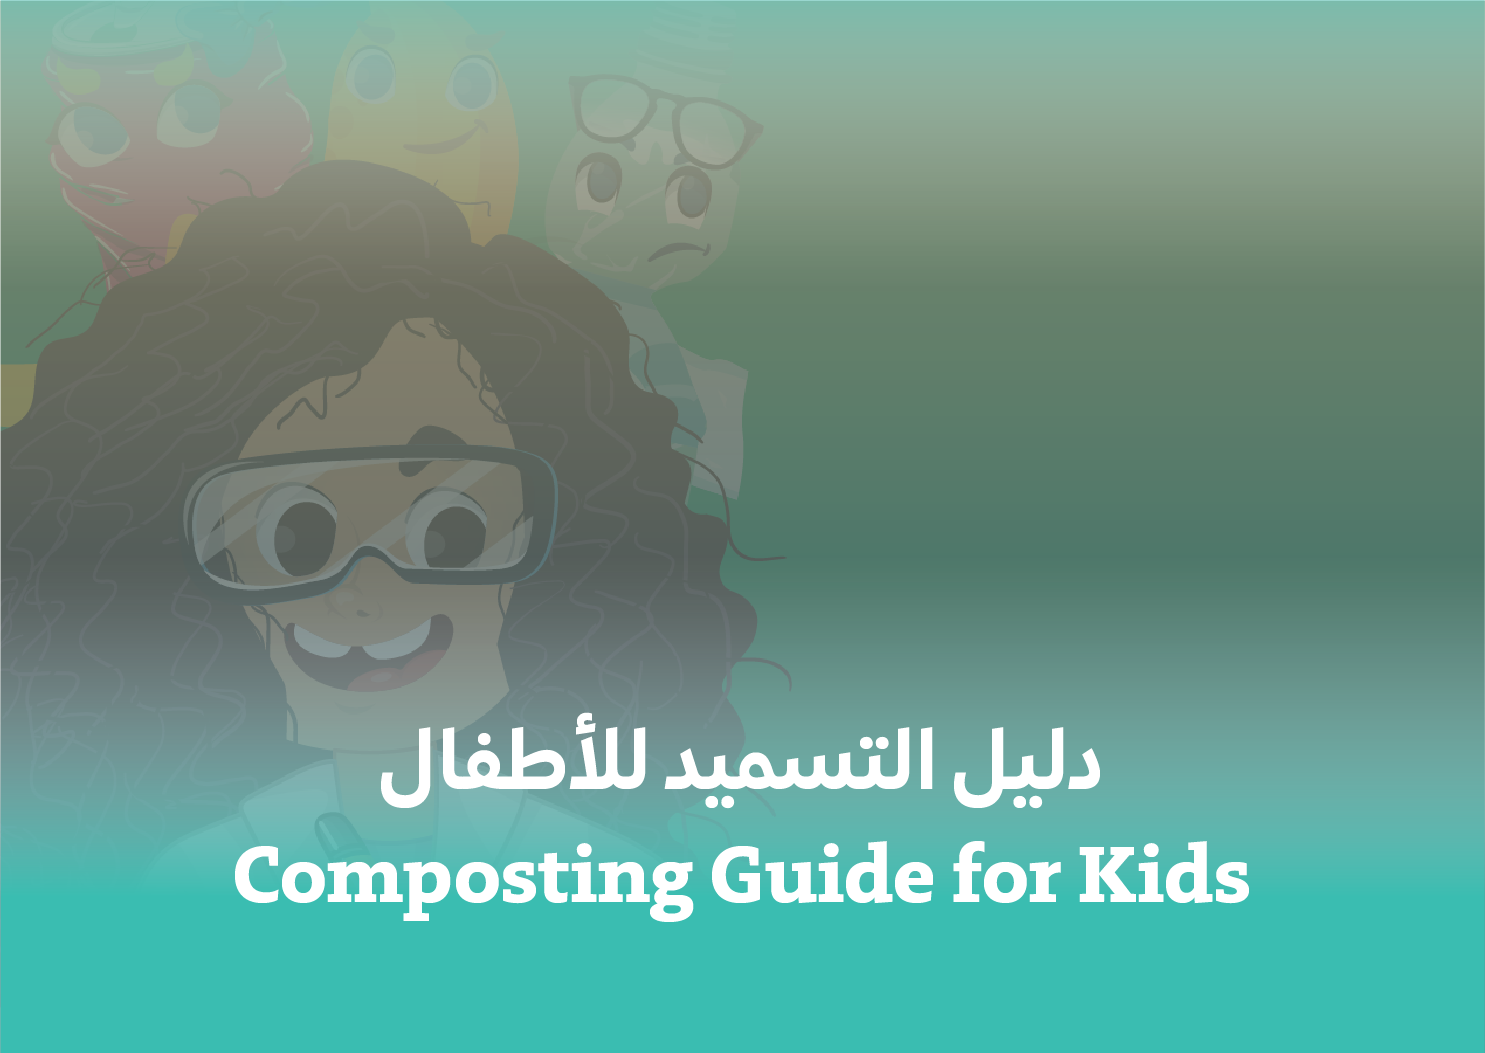 Composting Guide for Kids